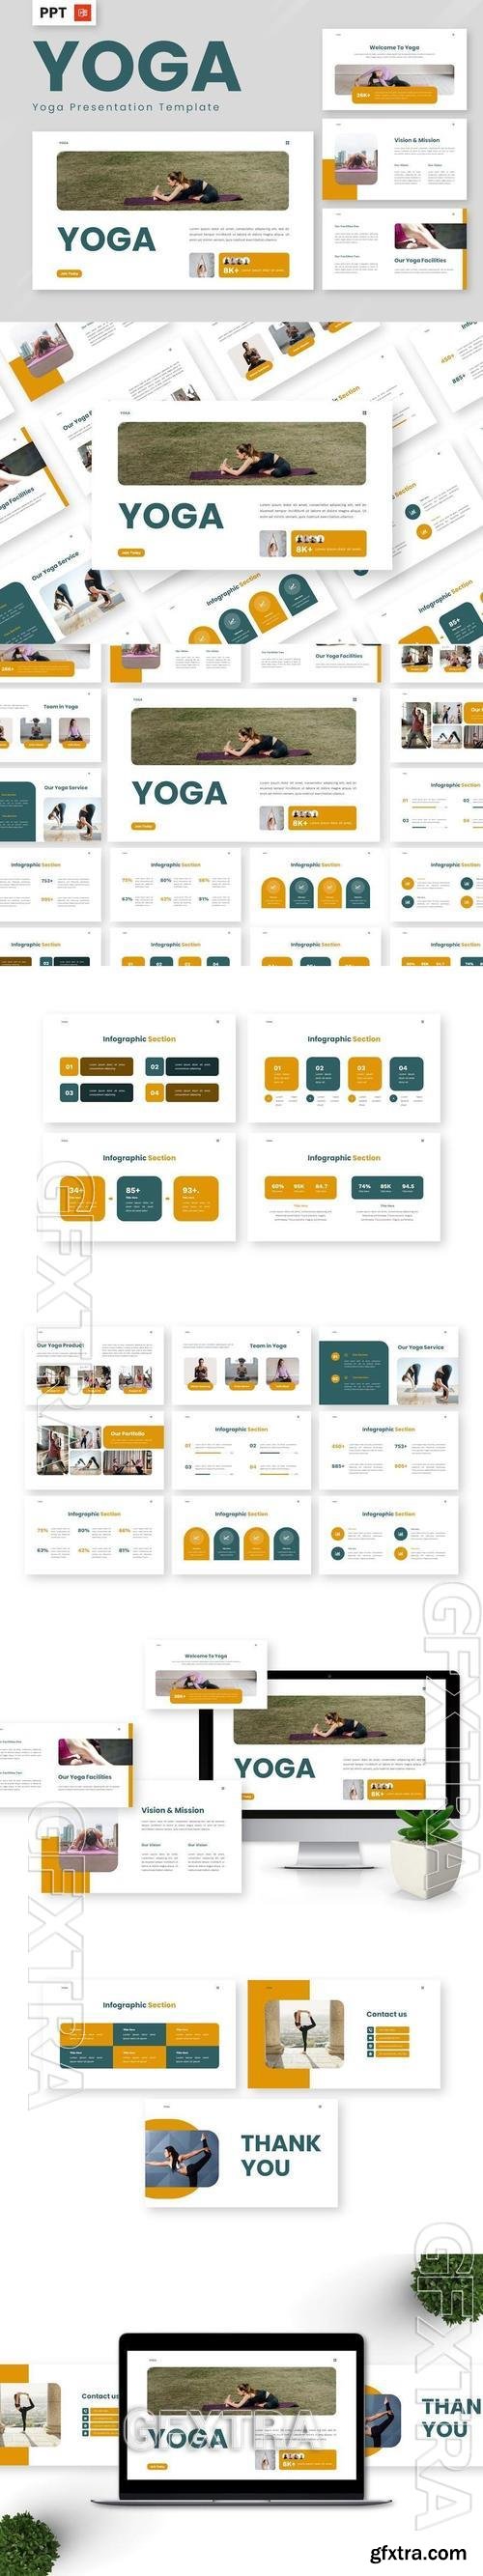 Yoga - Yoga Powerpoint Templates UD7T3WR